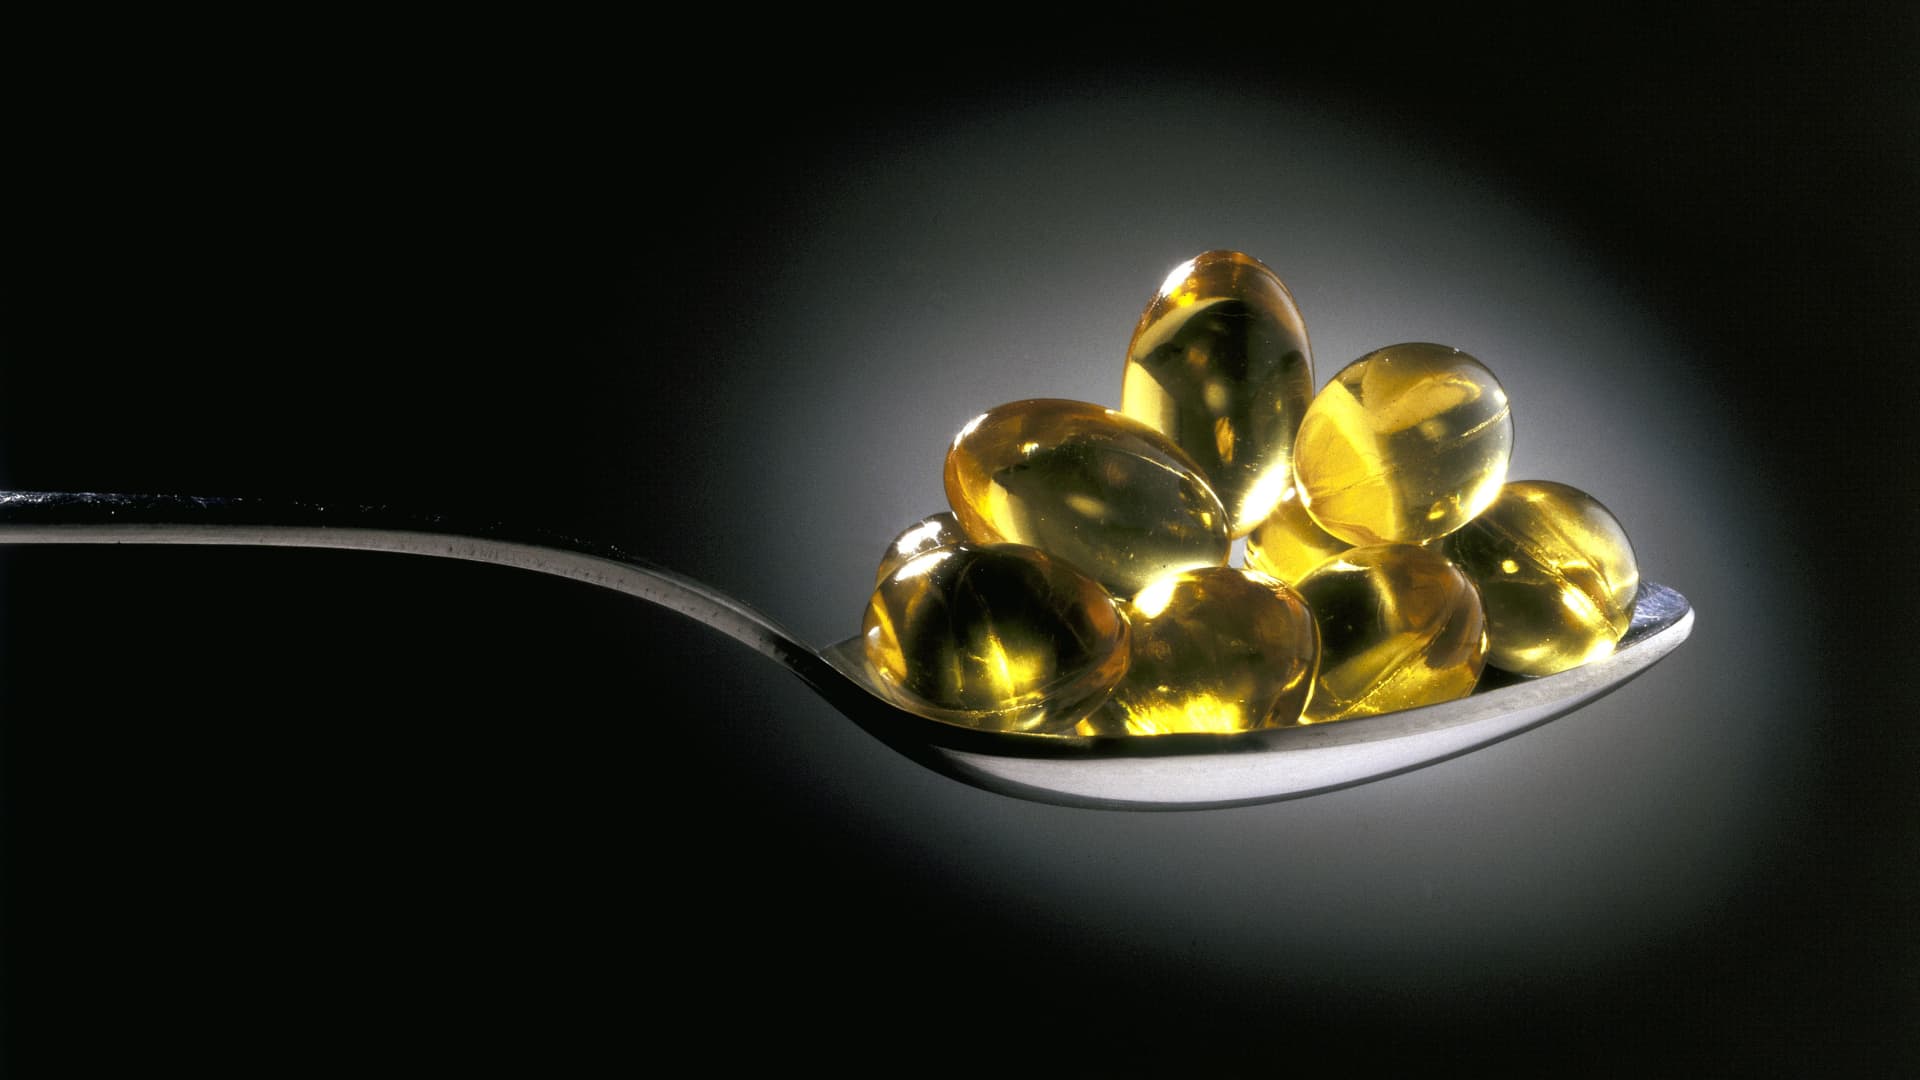 Fish oils may raise prostate cancer risks, study confirms